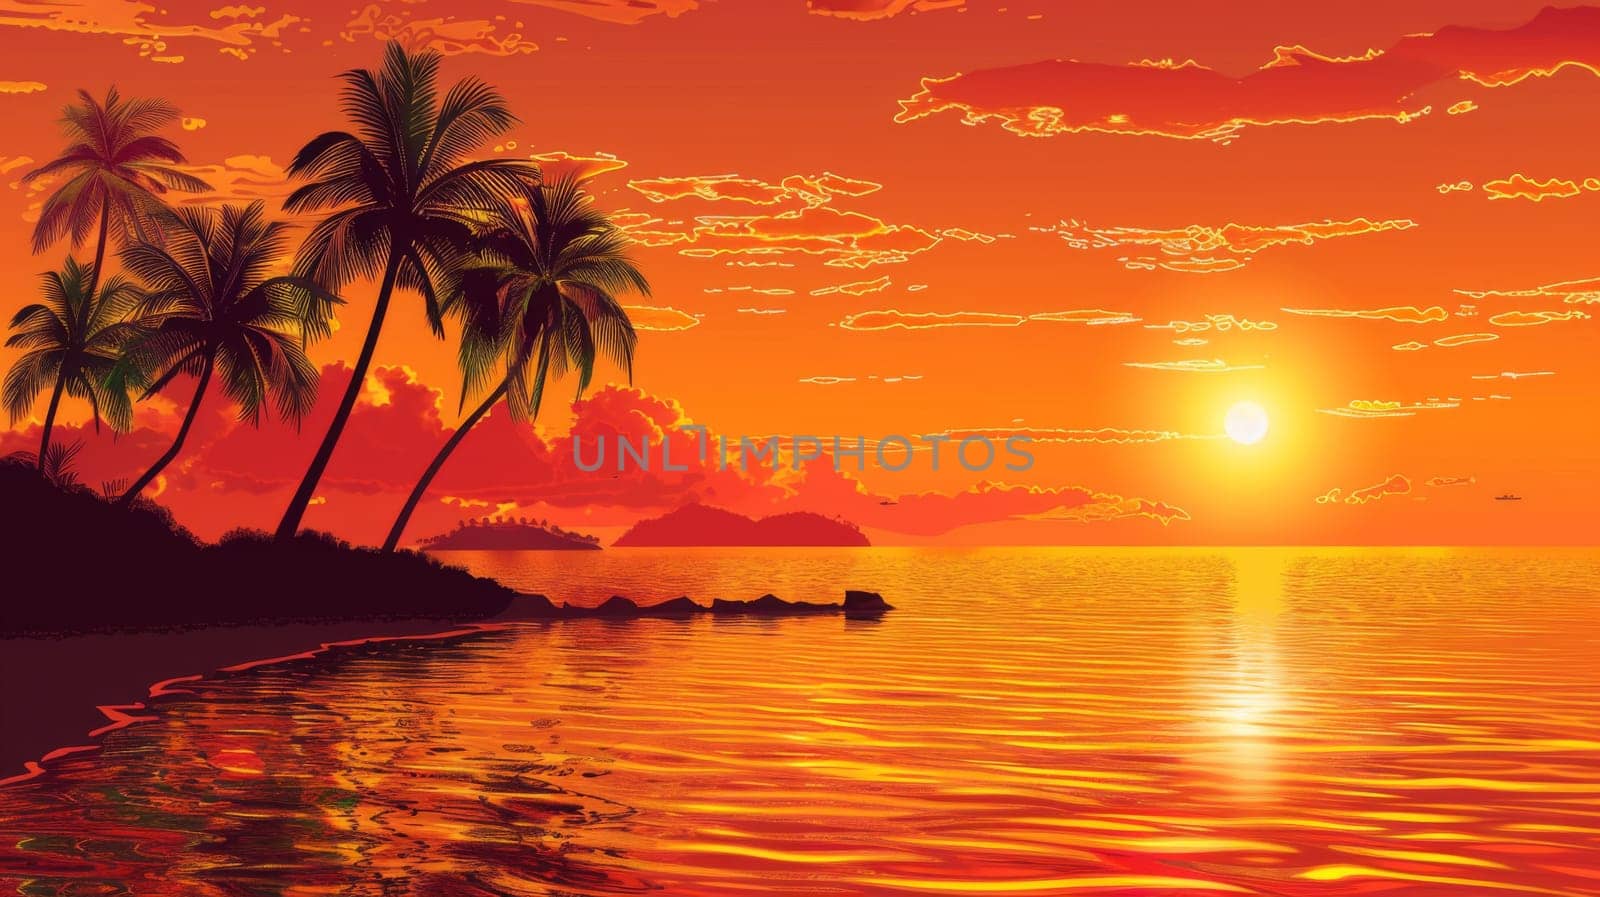 A sunset over the ocean with palm trees and a boat, AI by starush